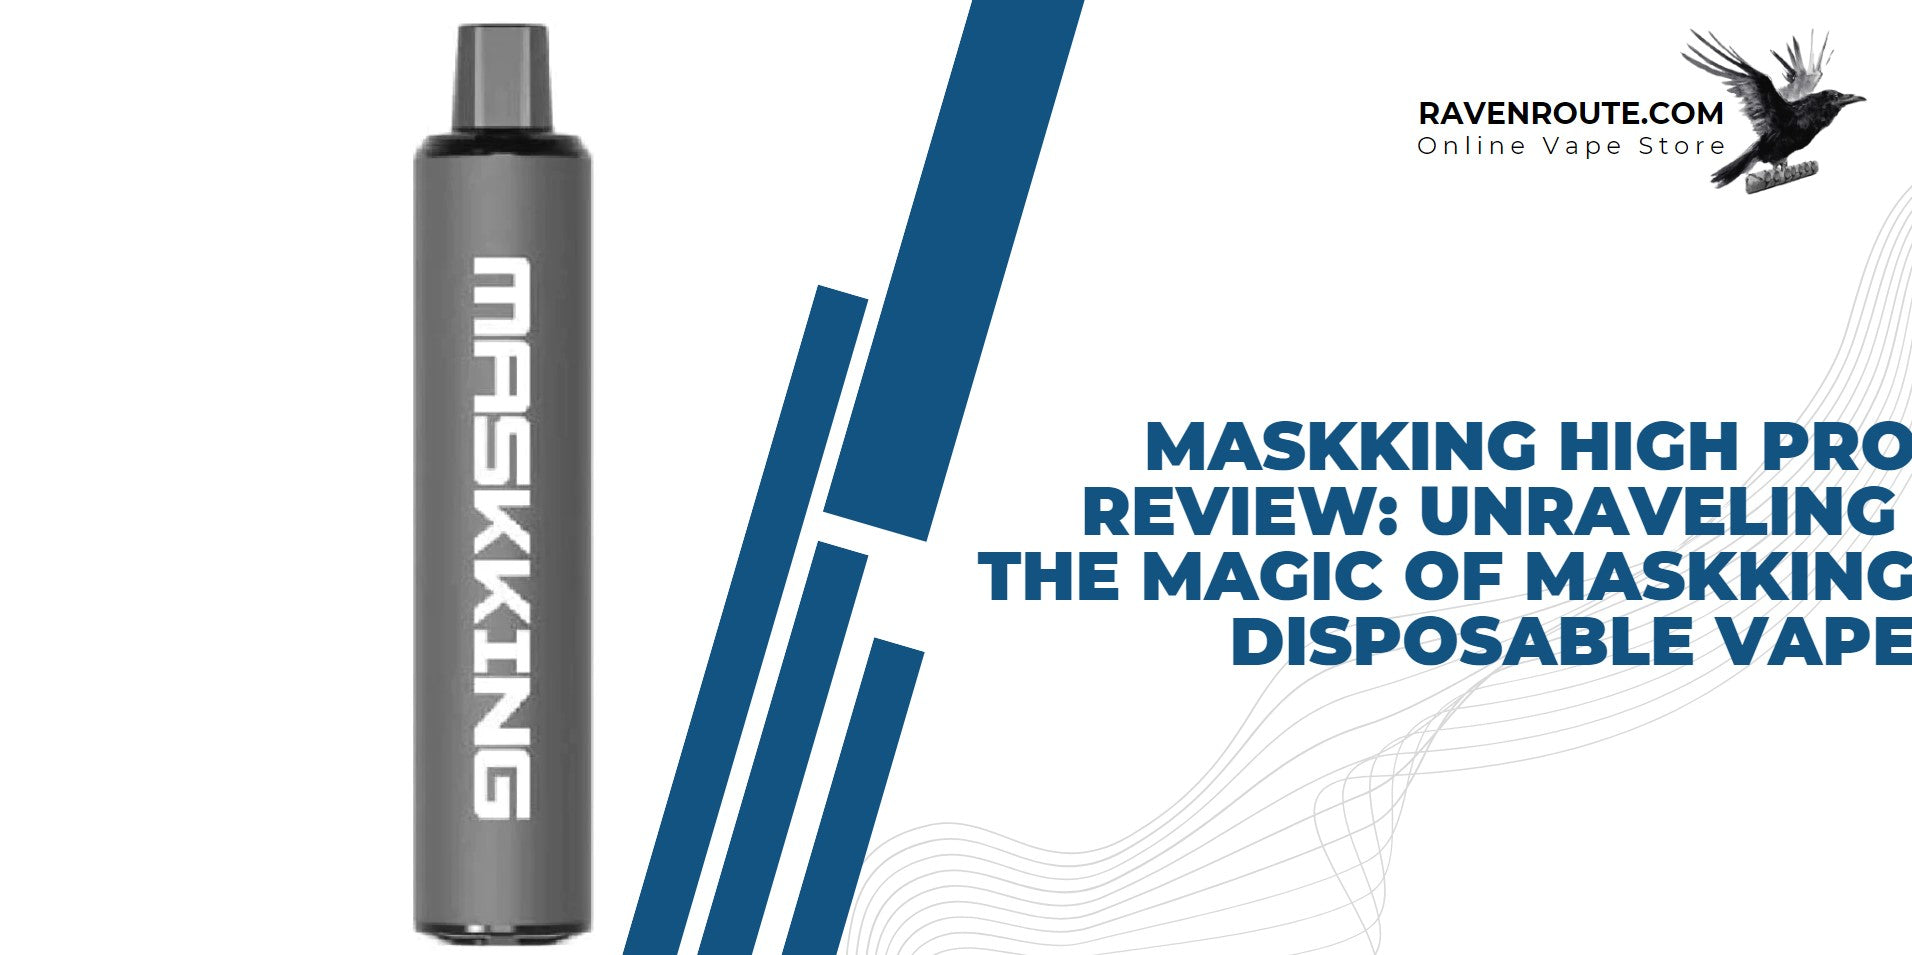 Maskking High Pro Review: Unraveling  the Magic of MASKKING Disposable Vape